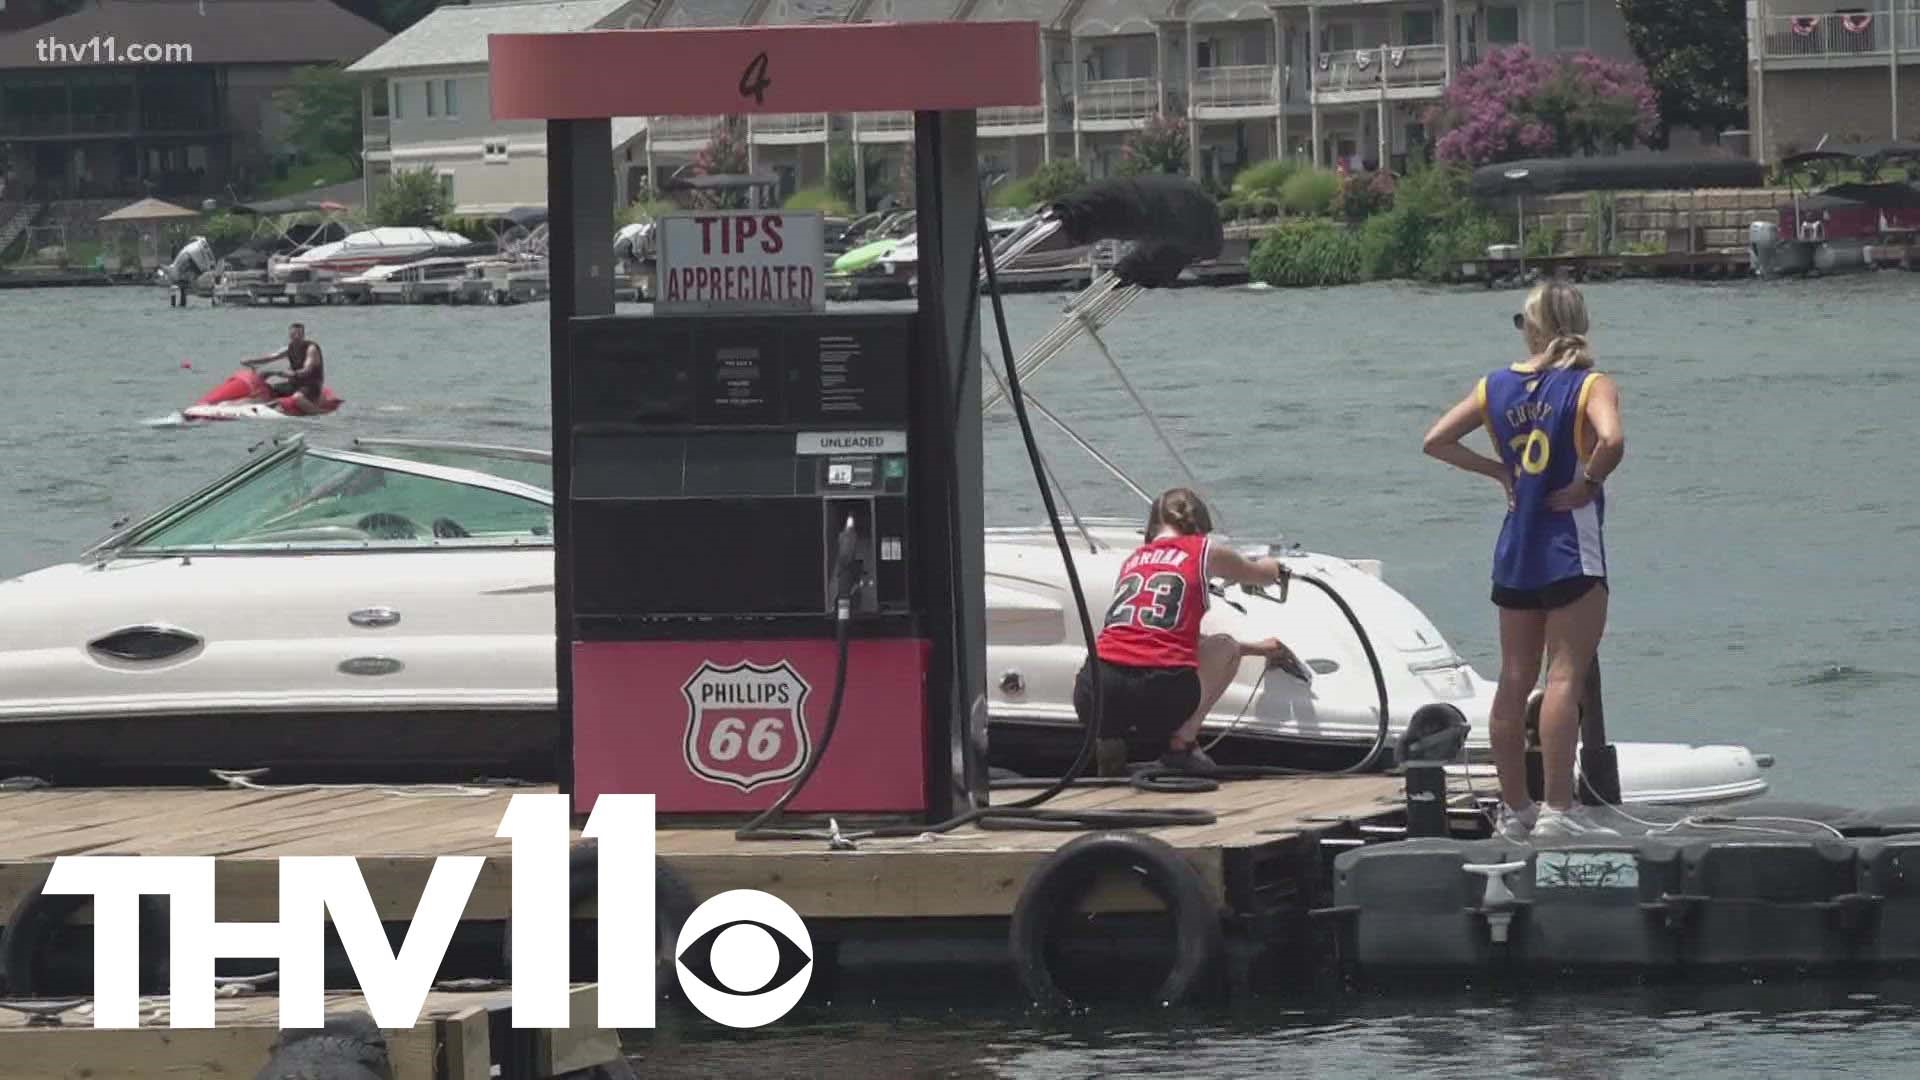 Hundreds are heading to the lake to celebrate the 4th of July. The price of fuel is impacting boat rental shops, where they're making adjustments for affordability.